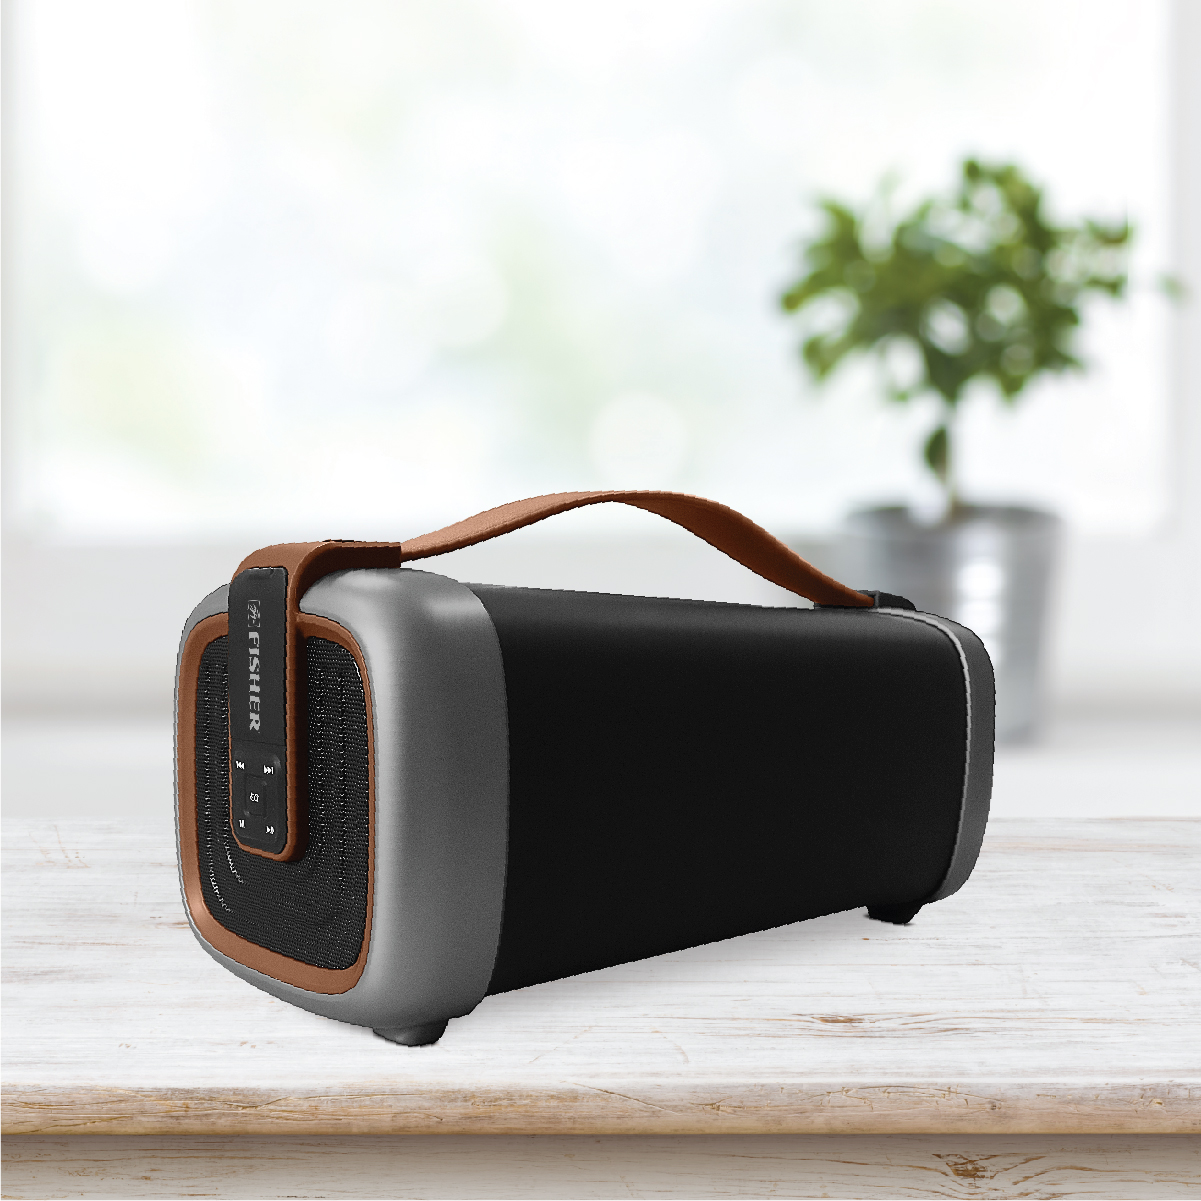 Fisher Traveler Wireless Outdoor Bluetooth Speaker, Portable Strap, Rubberized Exterior, Brown - image 3 of 6